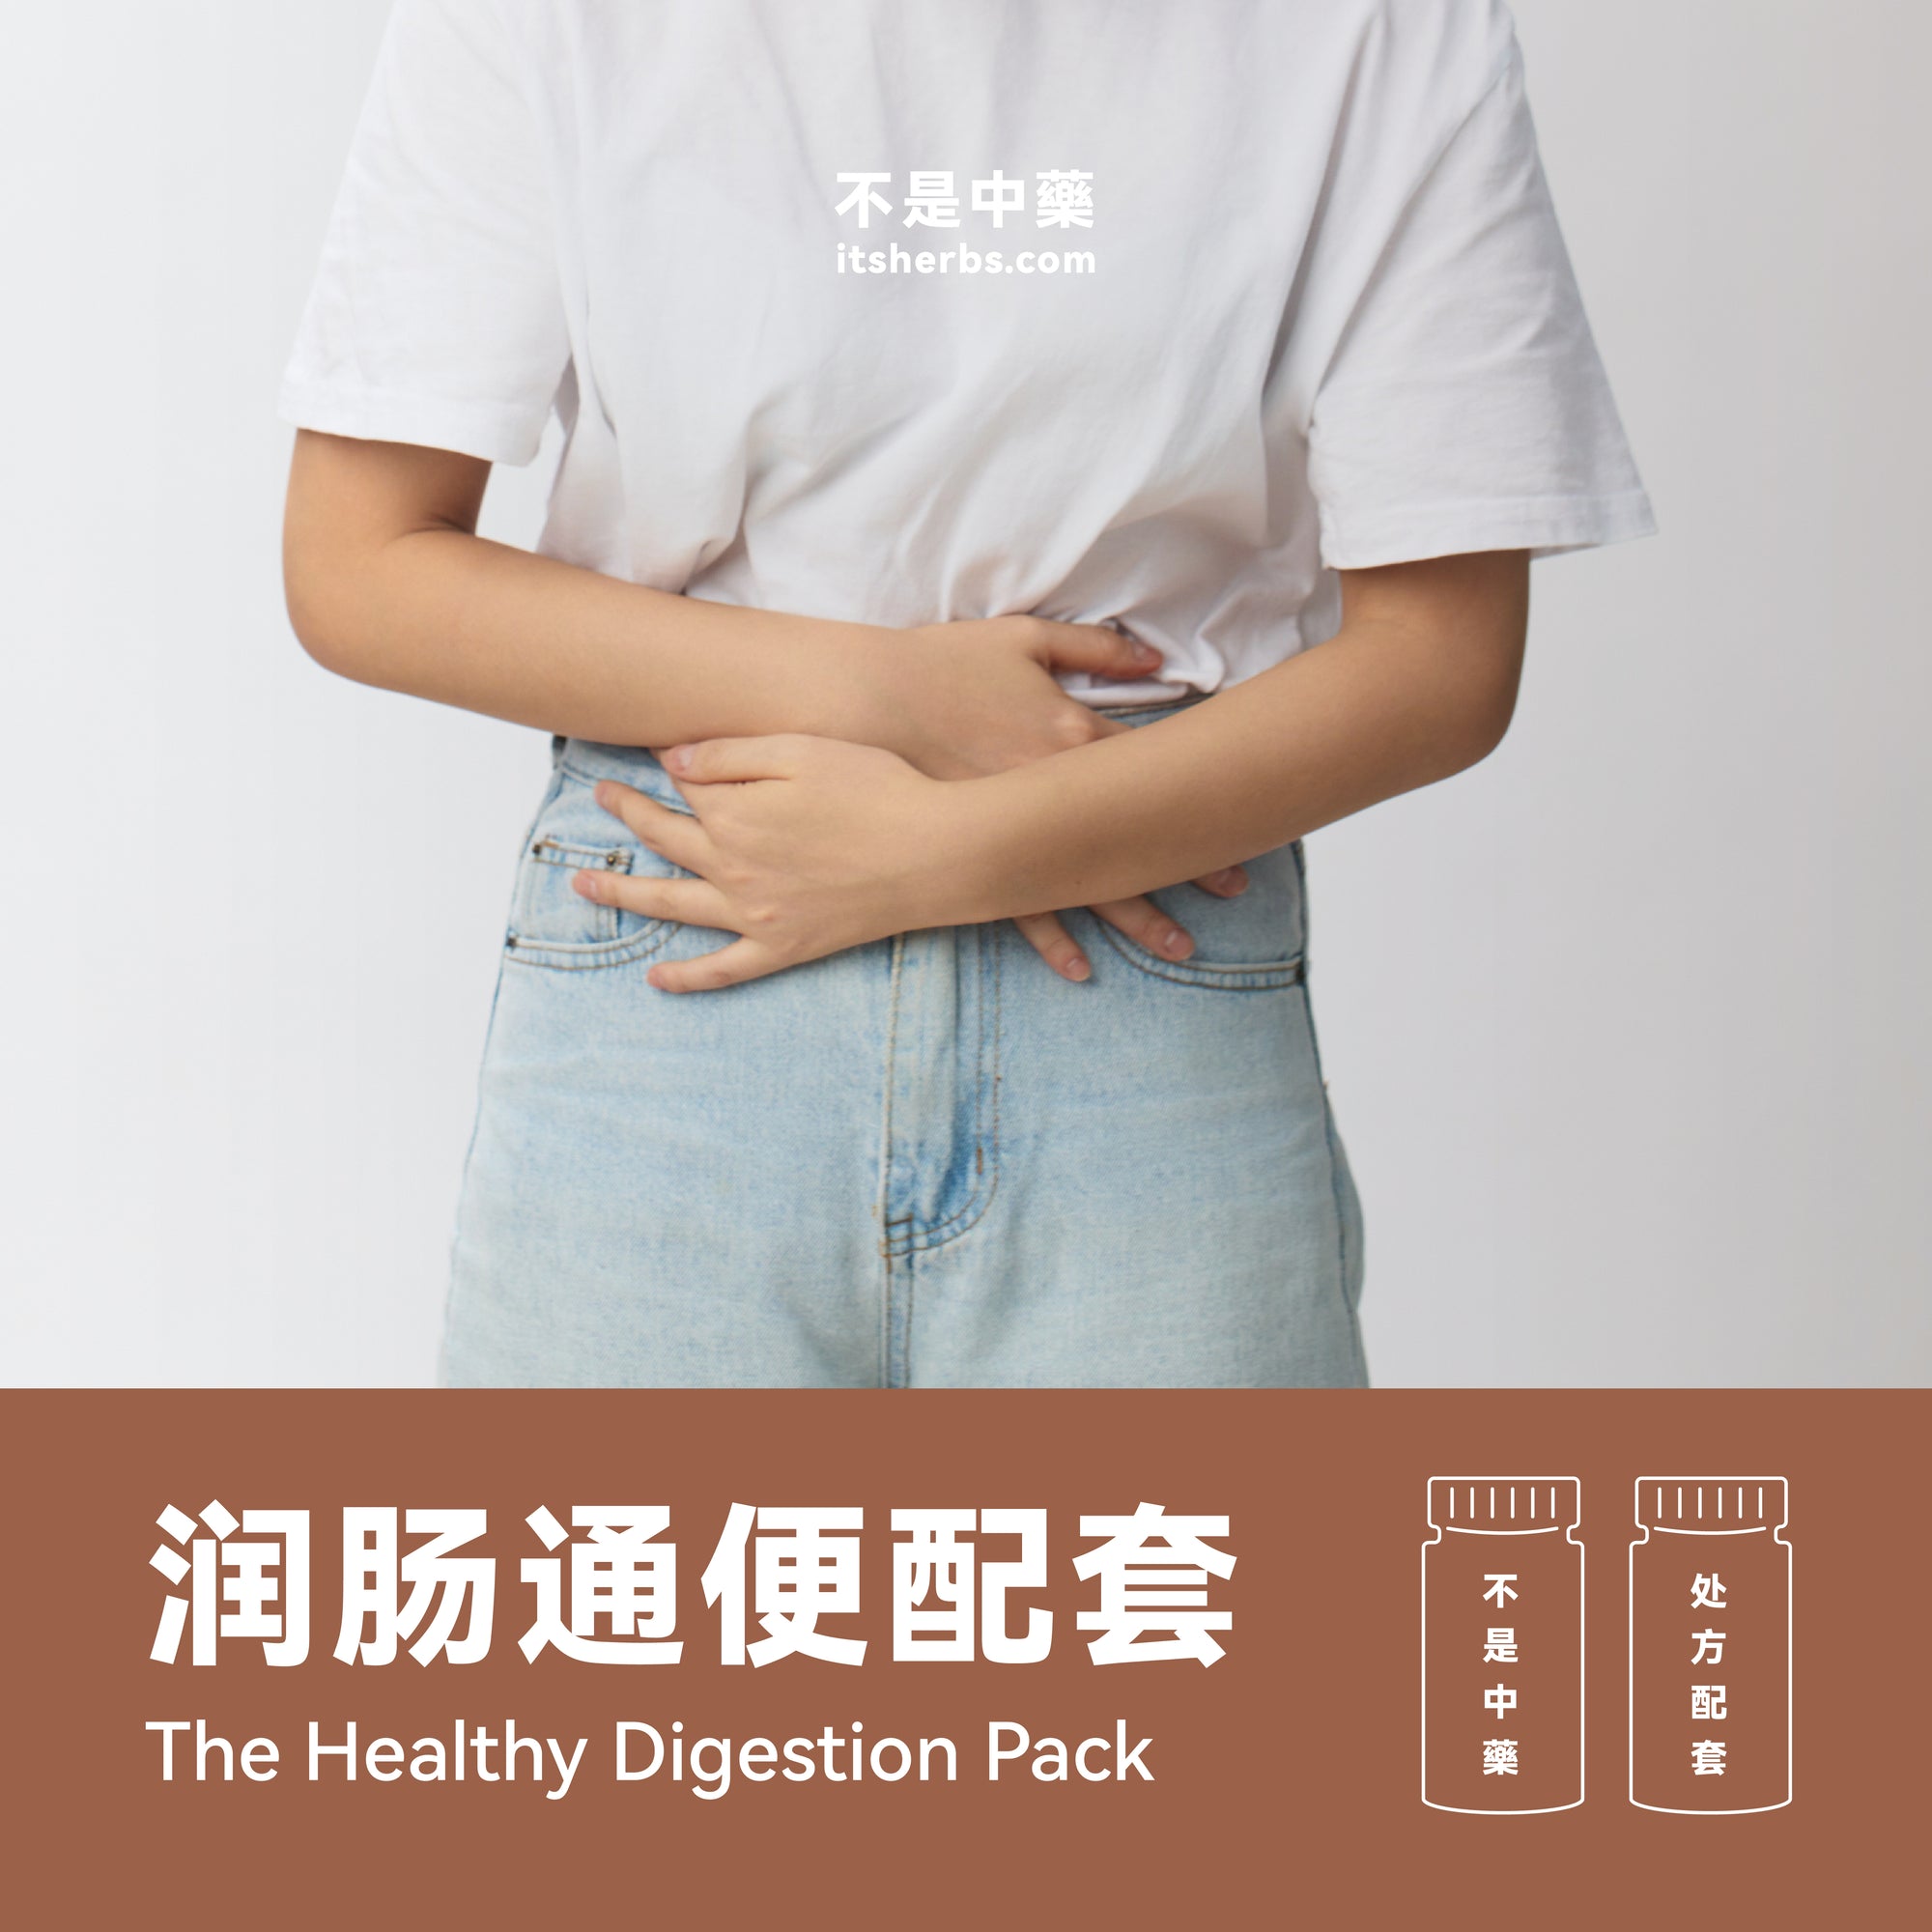 The Healthy Digestion Pack